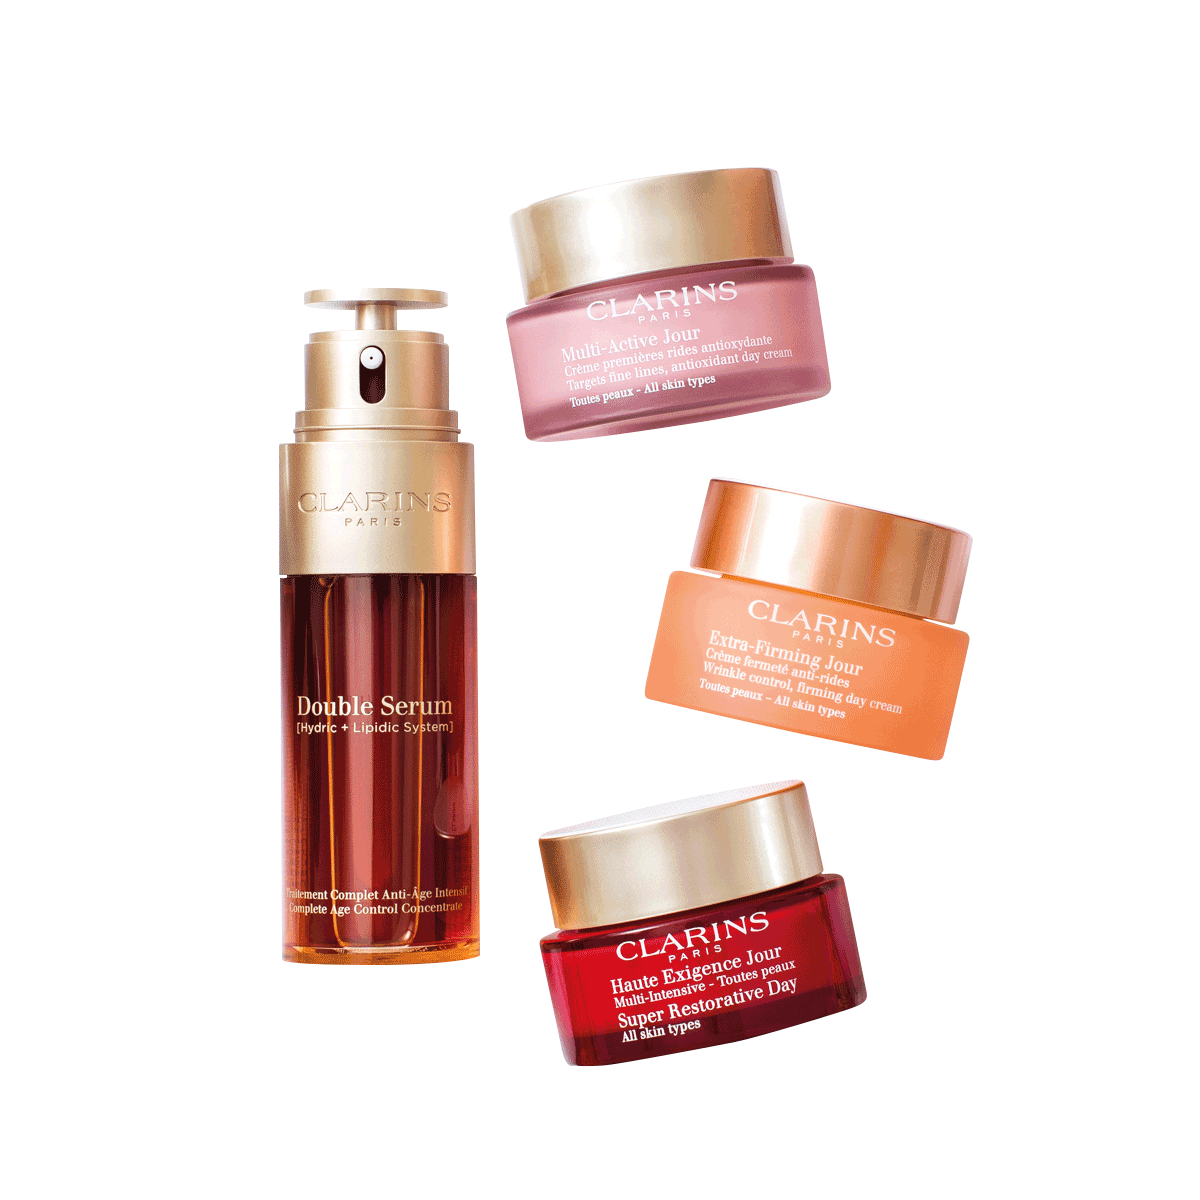 CLARINS Double Serum products